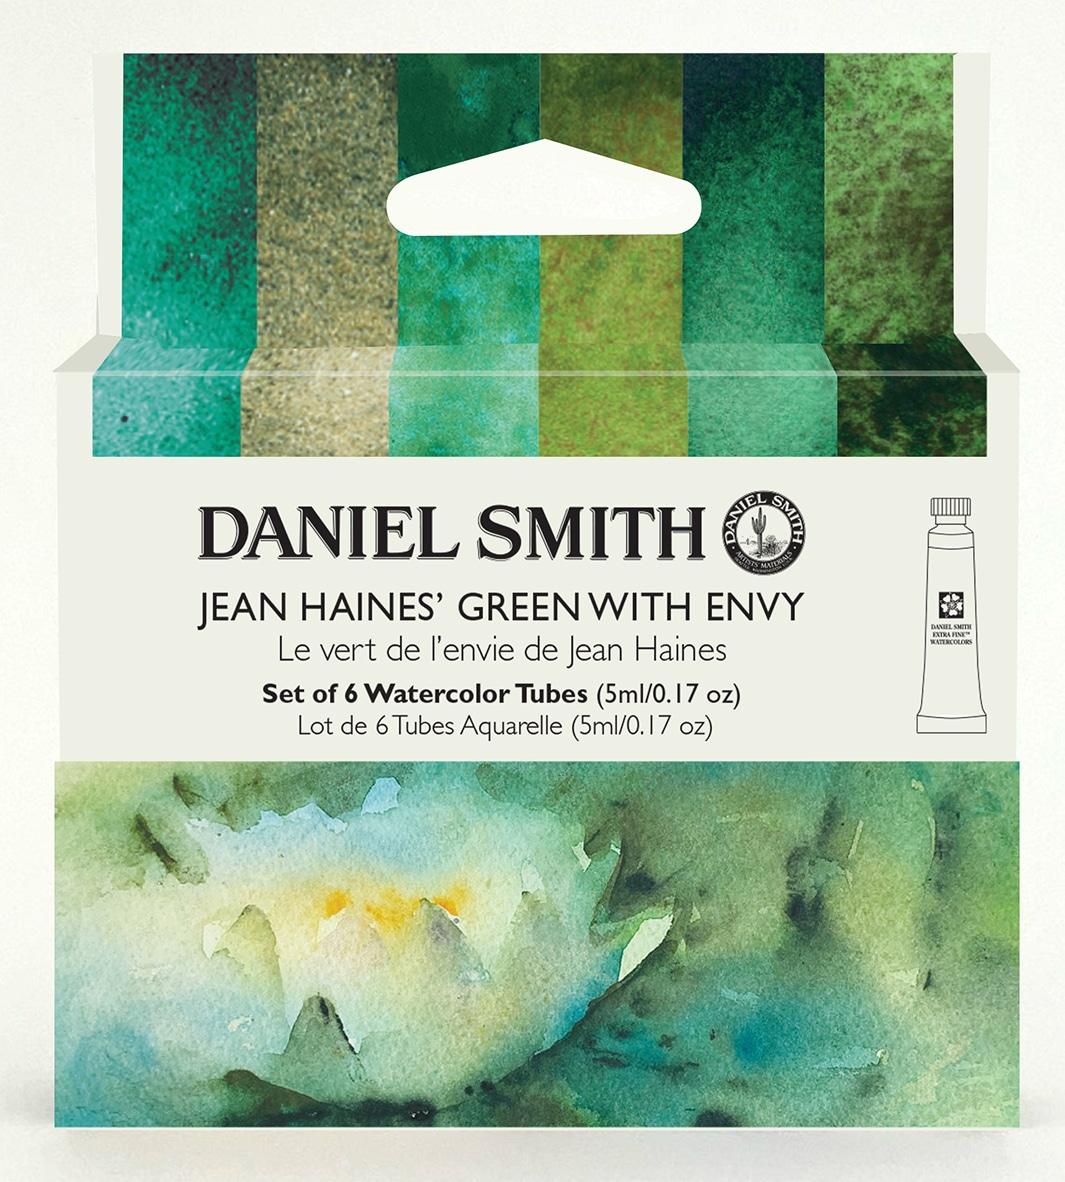 Daniel Smith Extra fine Watercolors 5 ml Tubes - Jean Haine`s Green with Envy Set - 6 Tubes